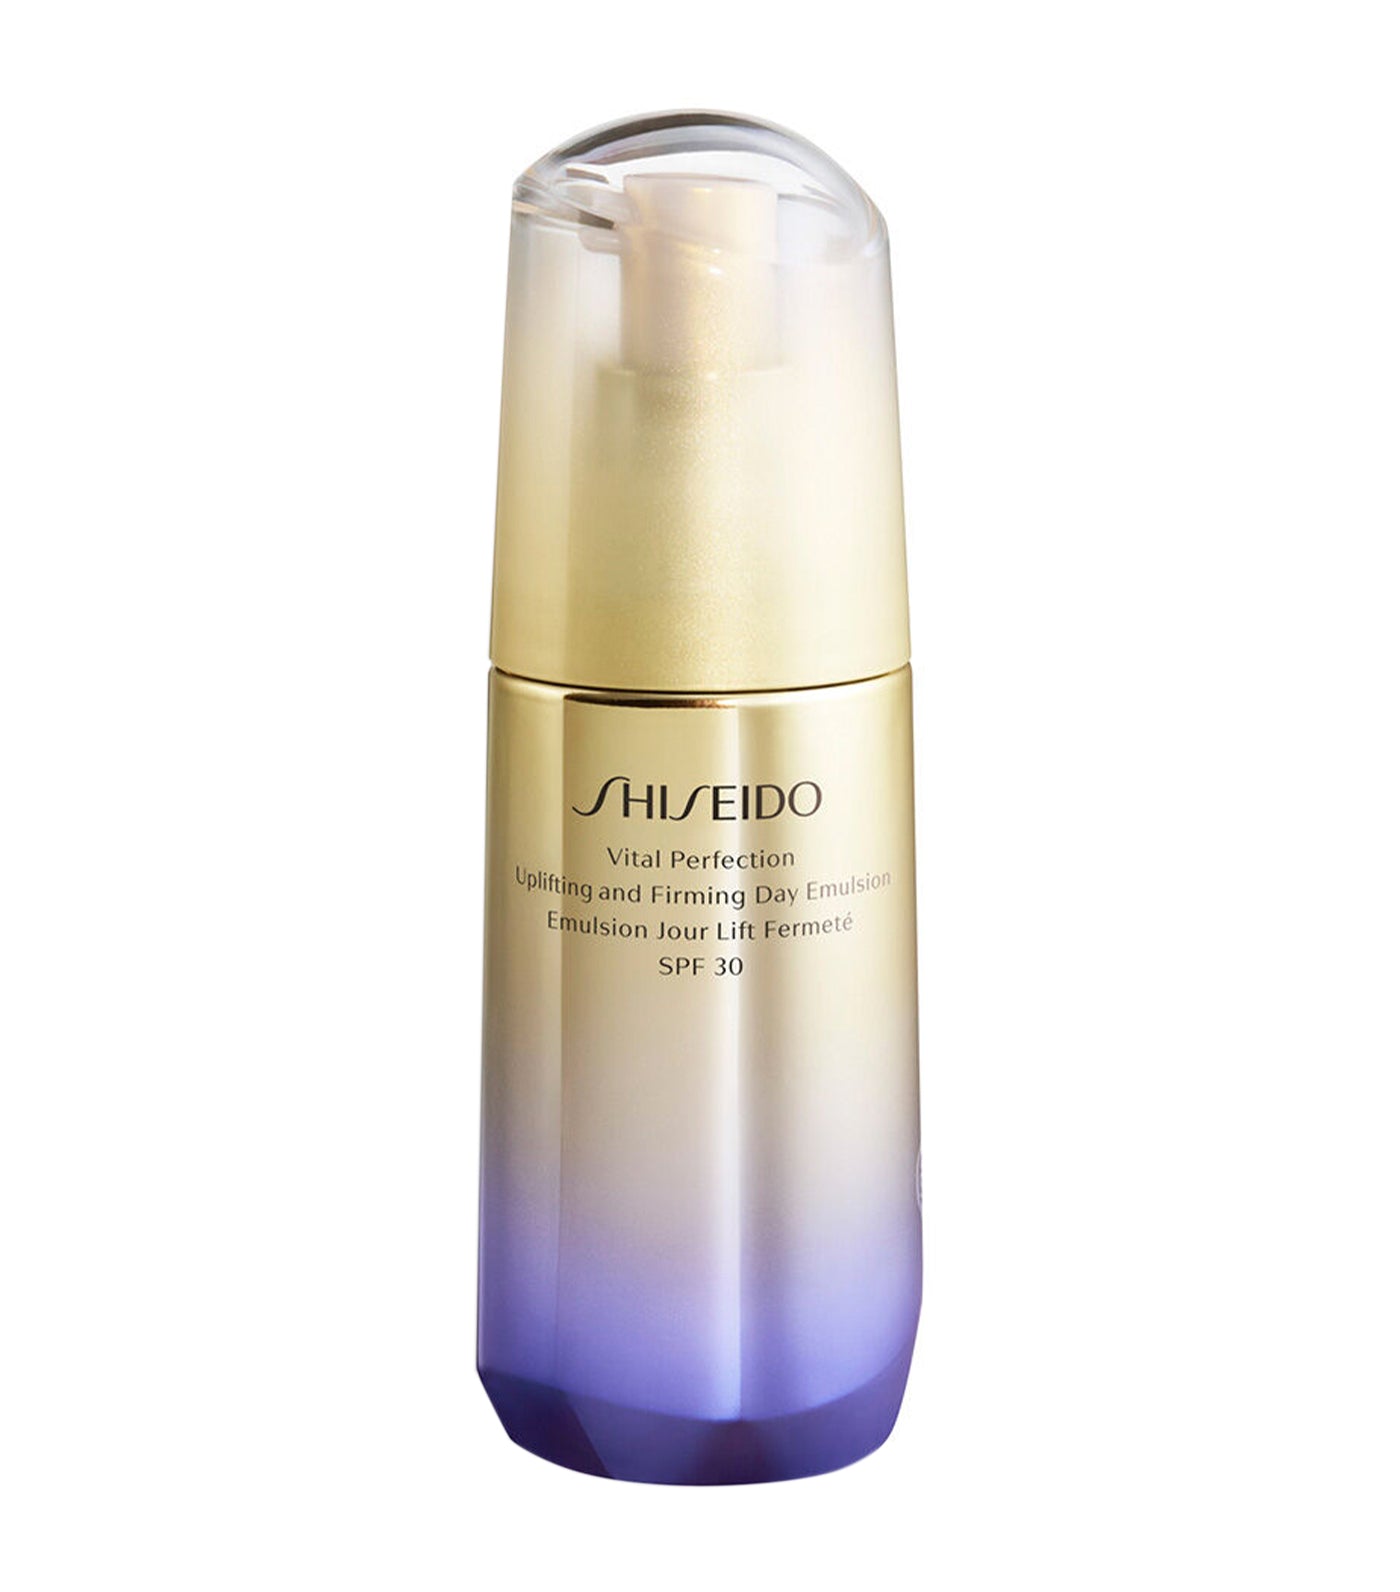 Vital Perfection Uplifting and Firming Day Emulsion